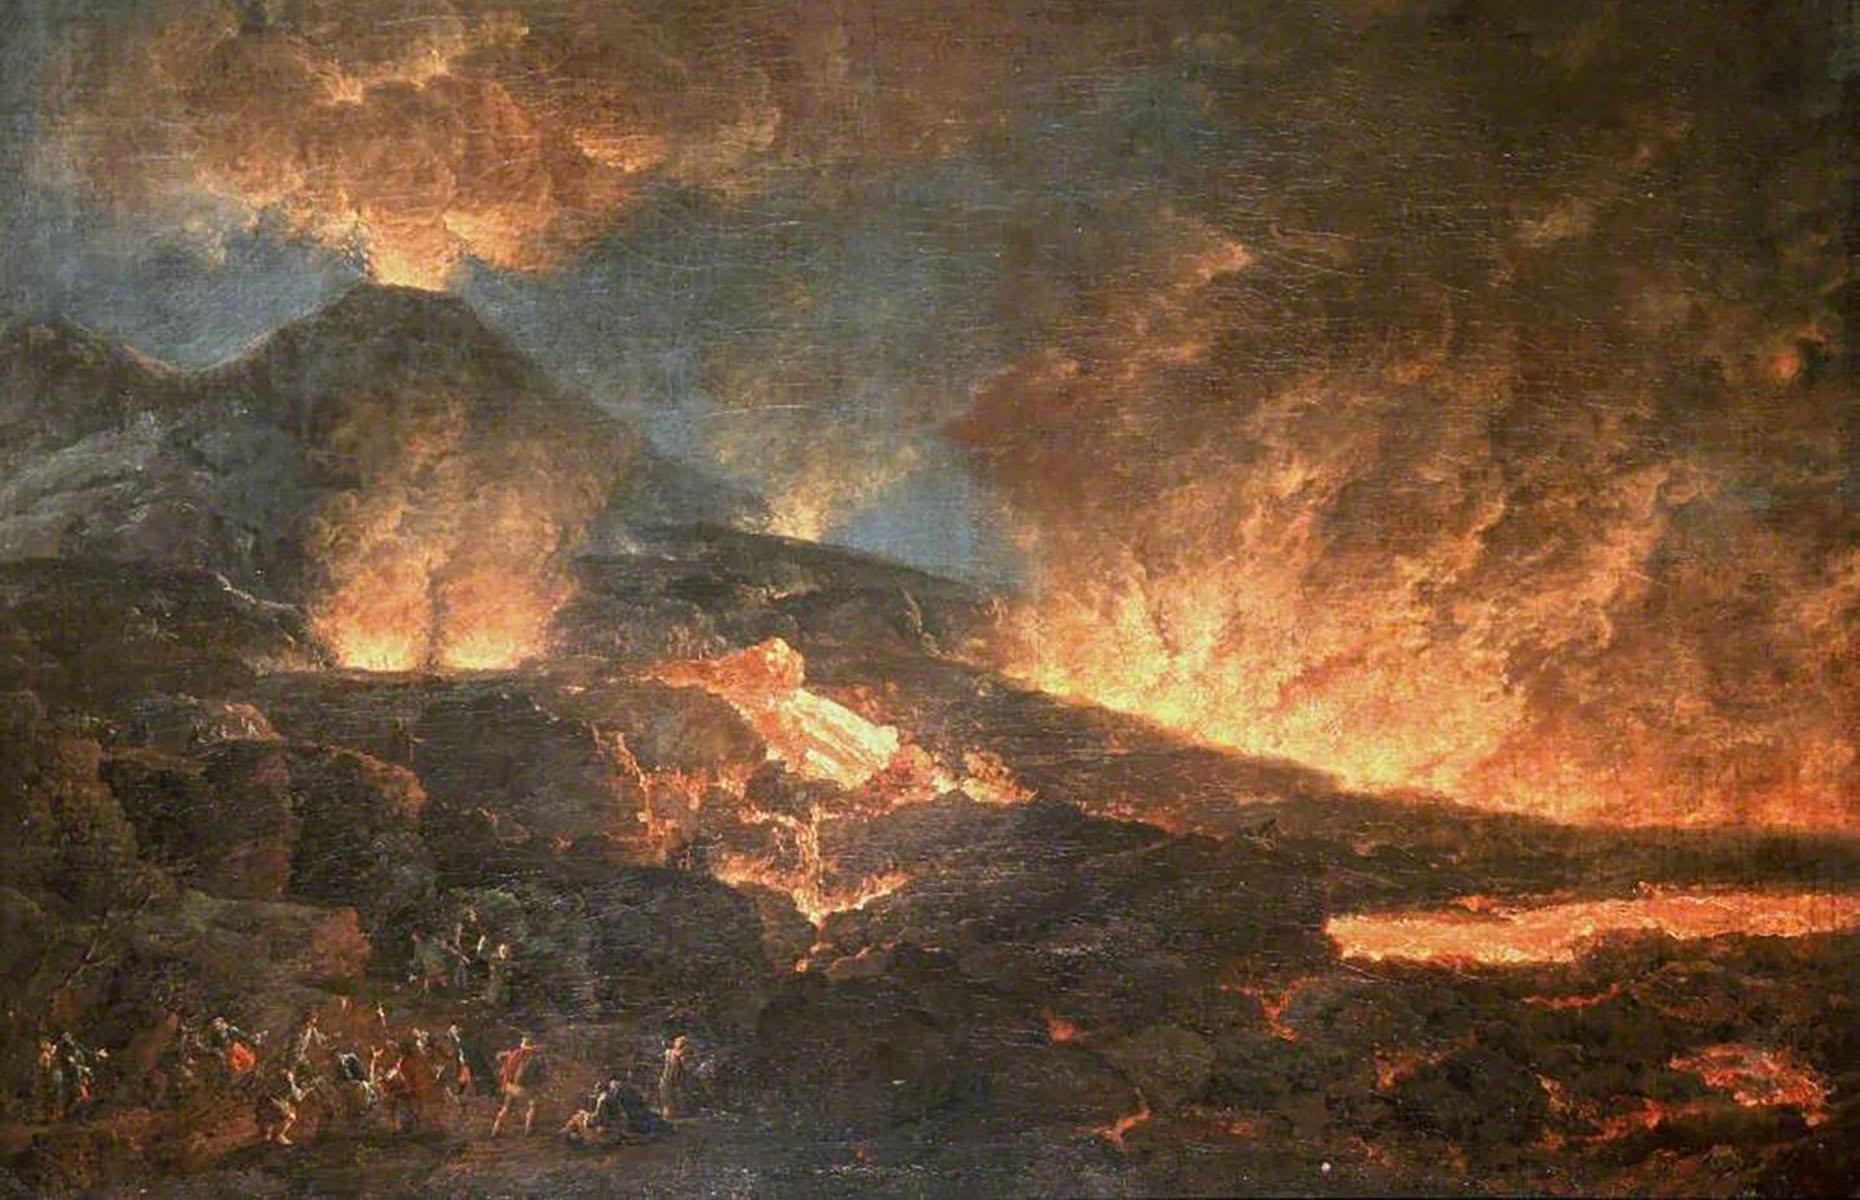 <p>Debris continued to pile up at the doors and windows of houses around Pompeii, leaving residents trapped as ash clogged the air and it became impossible to breathe – but an even greater danger lay around the corner. In just a few hours, a fast-moving current of lava, ash and noxious gases known as a ‘pyroclastic flow’ surged from the volcano, engulfing the town and turning it into a boiling-hot inferno.</p>  <p>As wave after wave spilled from the fiery summit of Vesuvius, temperatures spiked at more than 300°C (572°F), leaving no one able to survive.</p>